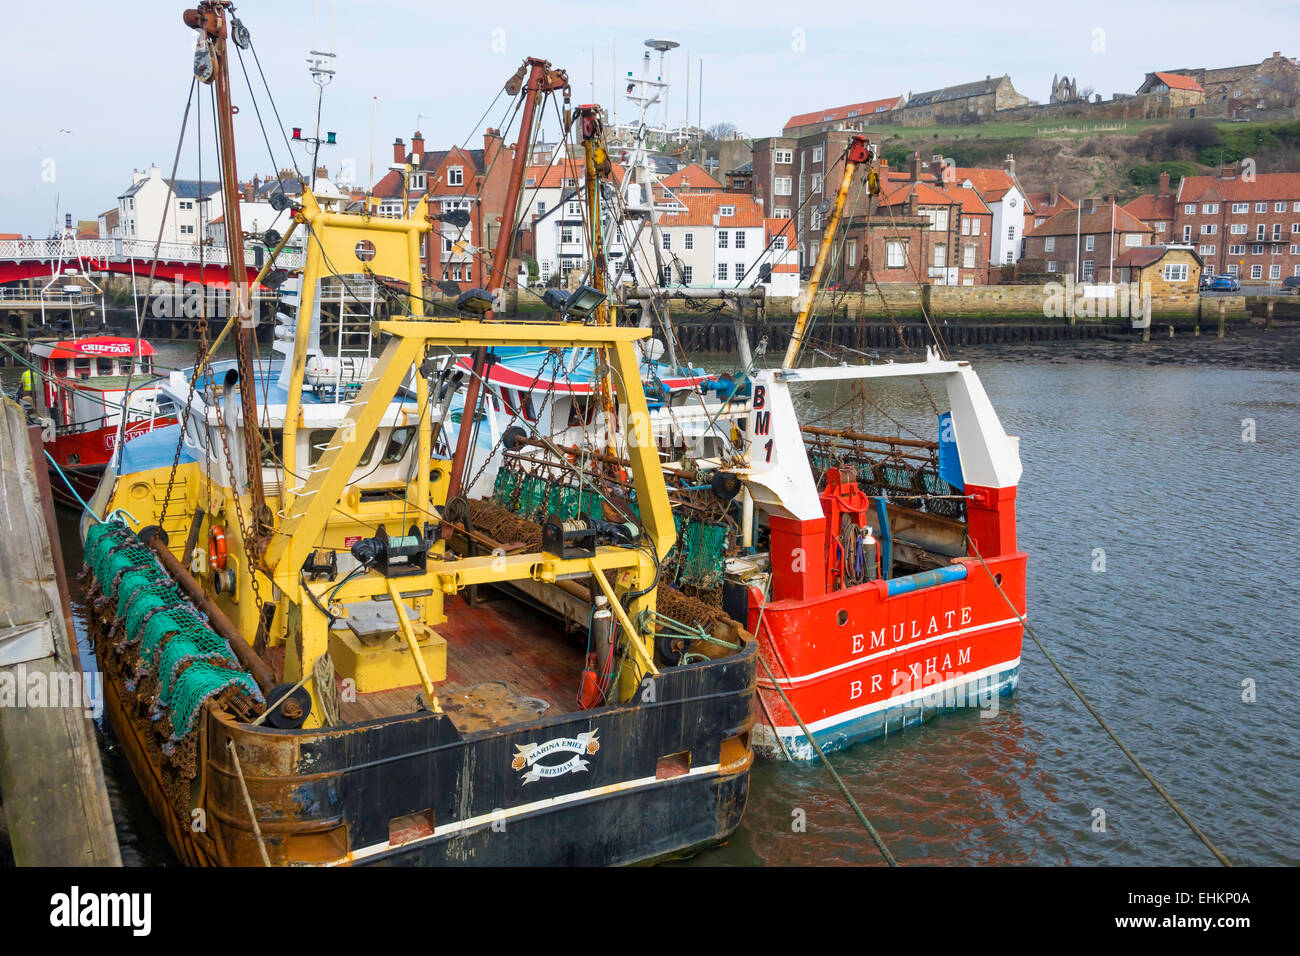 Emulate and Marina Emiel, Scallop fishing boats from Brixham at Endeavour Quay in Whitby  Harbour North Yorkshire England UK Stock Photo